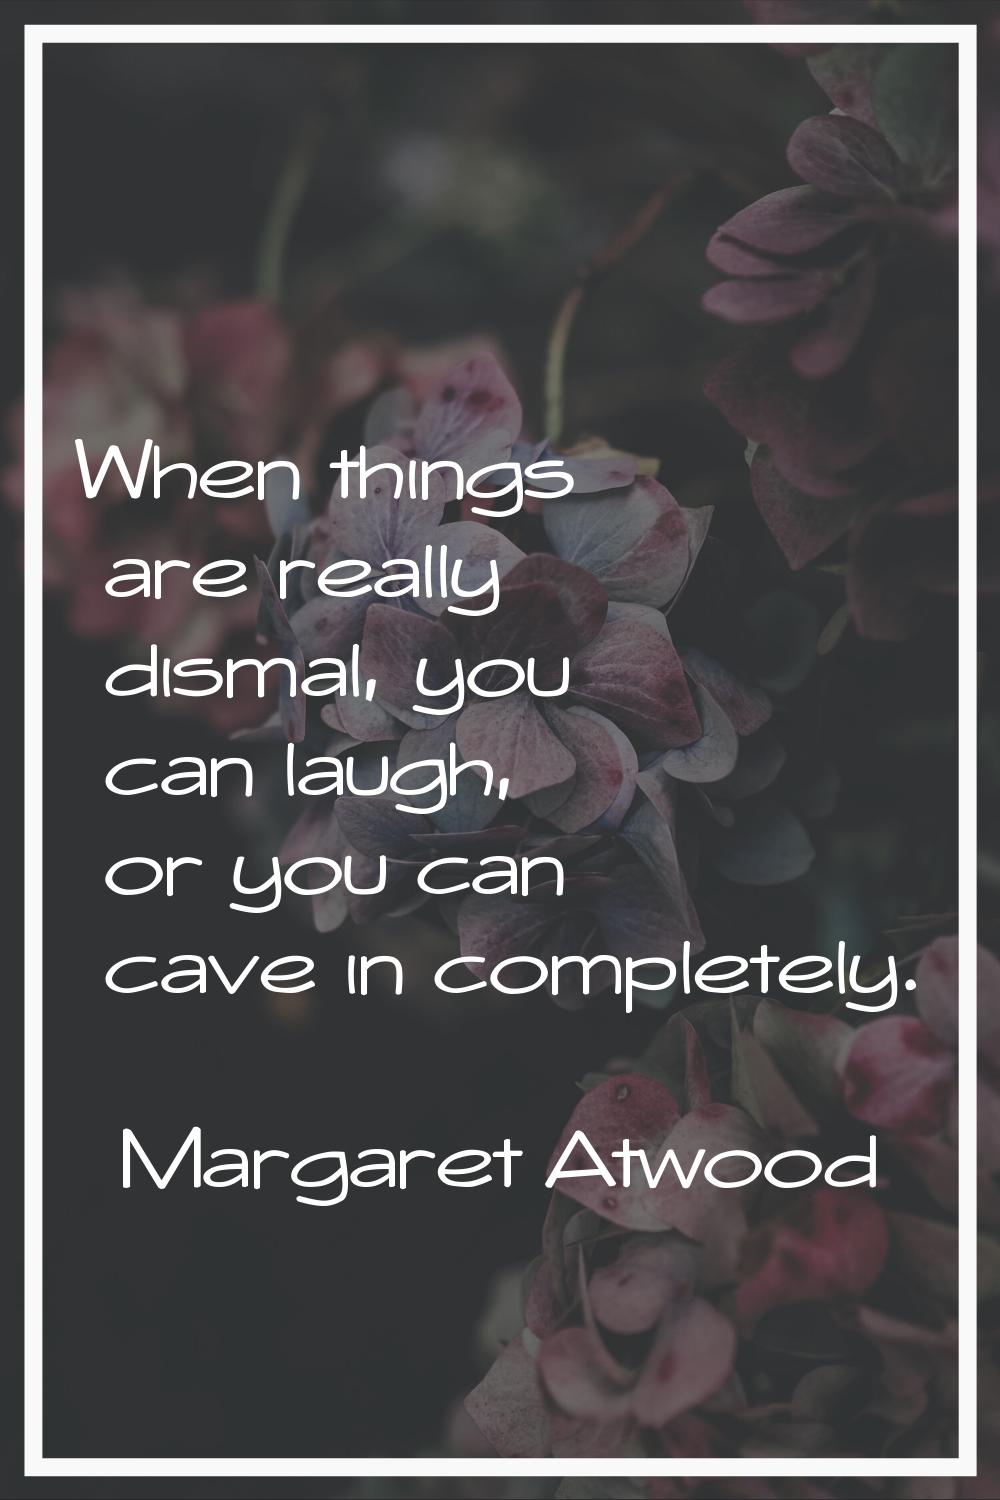 When things are really dismal, you can laugh, or you can cave in completely.